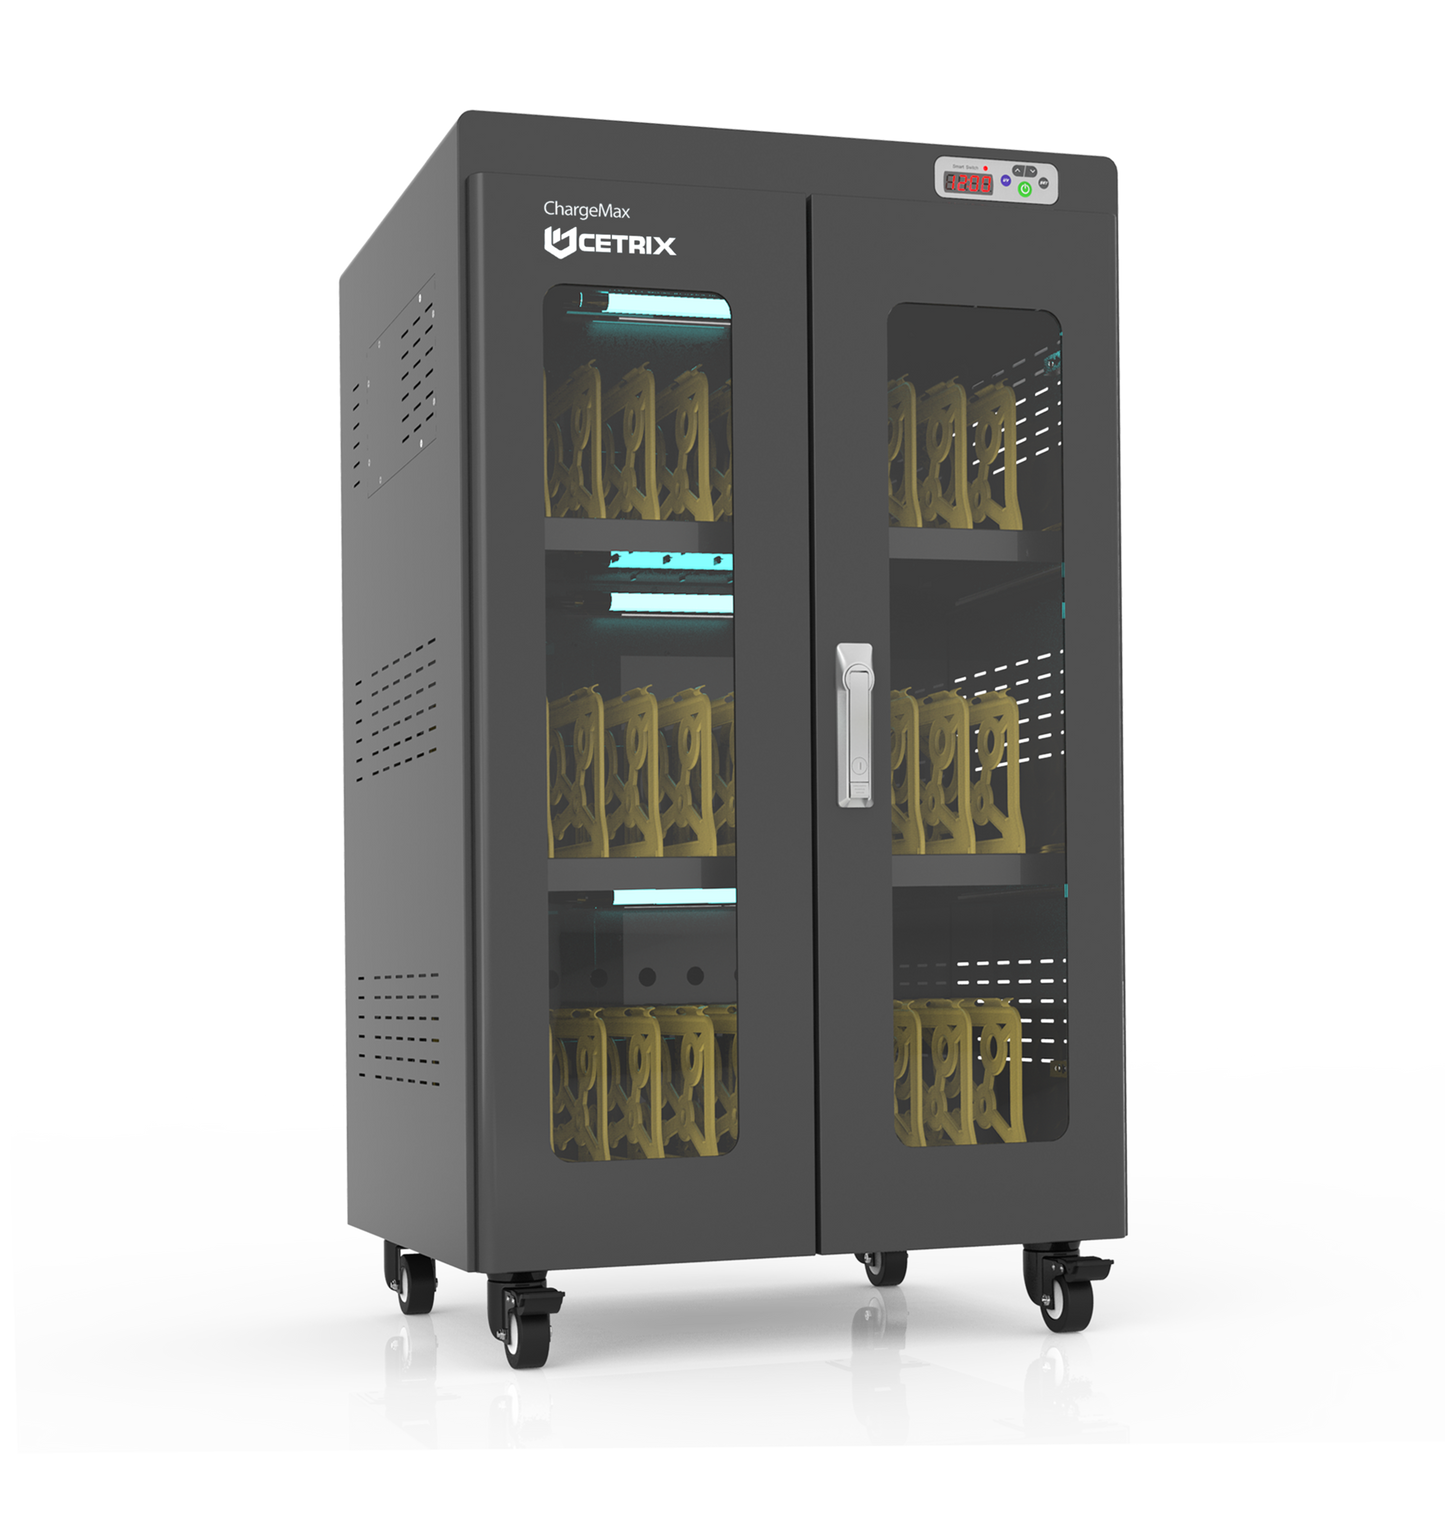 ChargeMax 30-bay Laptop Disinfection Charging Cabinet (CT-30BP) - High Capacity - ChargeMax comes in different sizes for charging multiple devices allowing charging of the devices without the need for proprietary adapters allowing charging of the devices